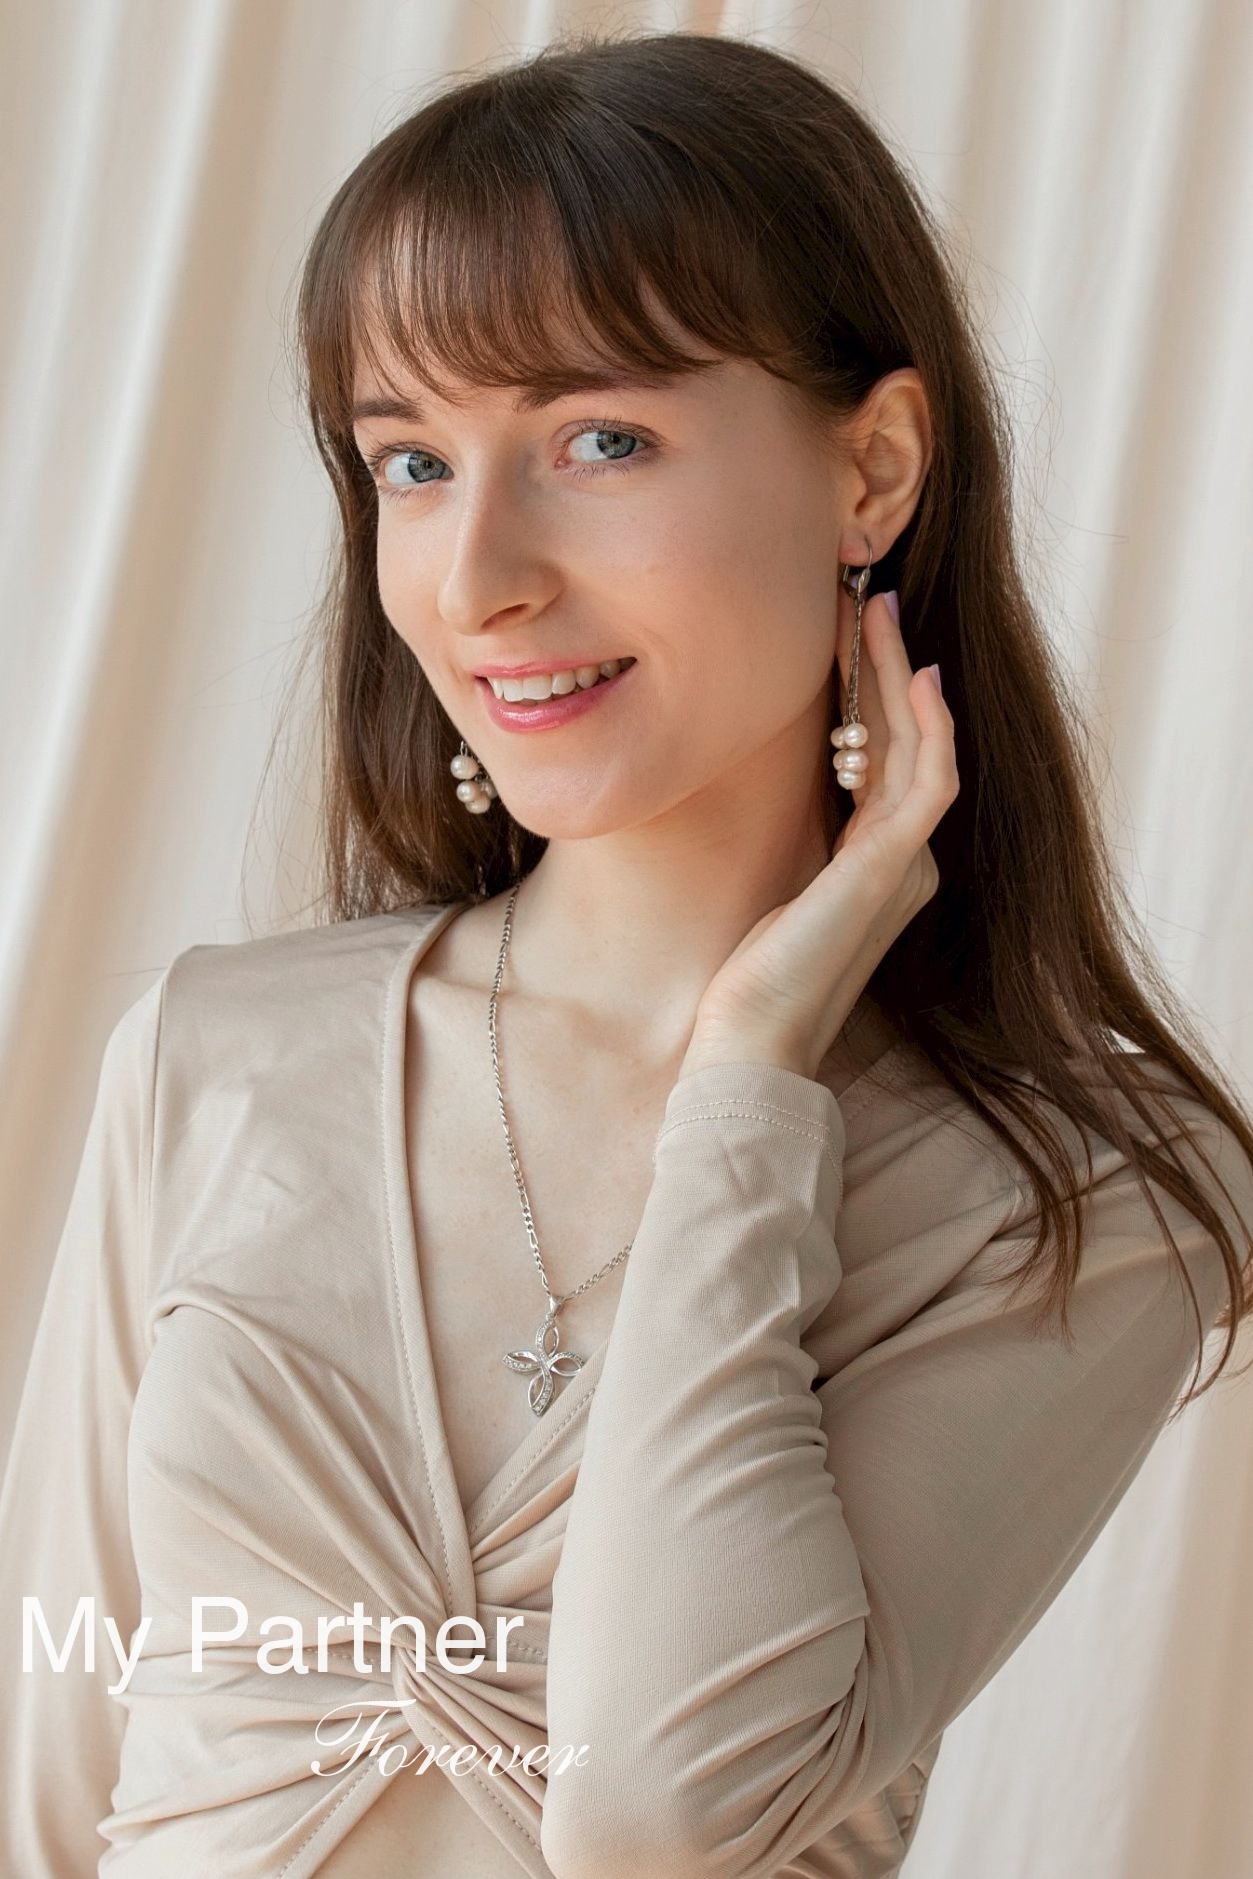 Online Dating with Stunning Belarusian Girl Diana from Minsk, Belarus